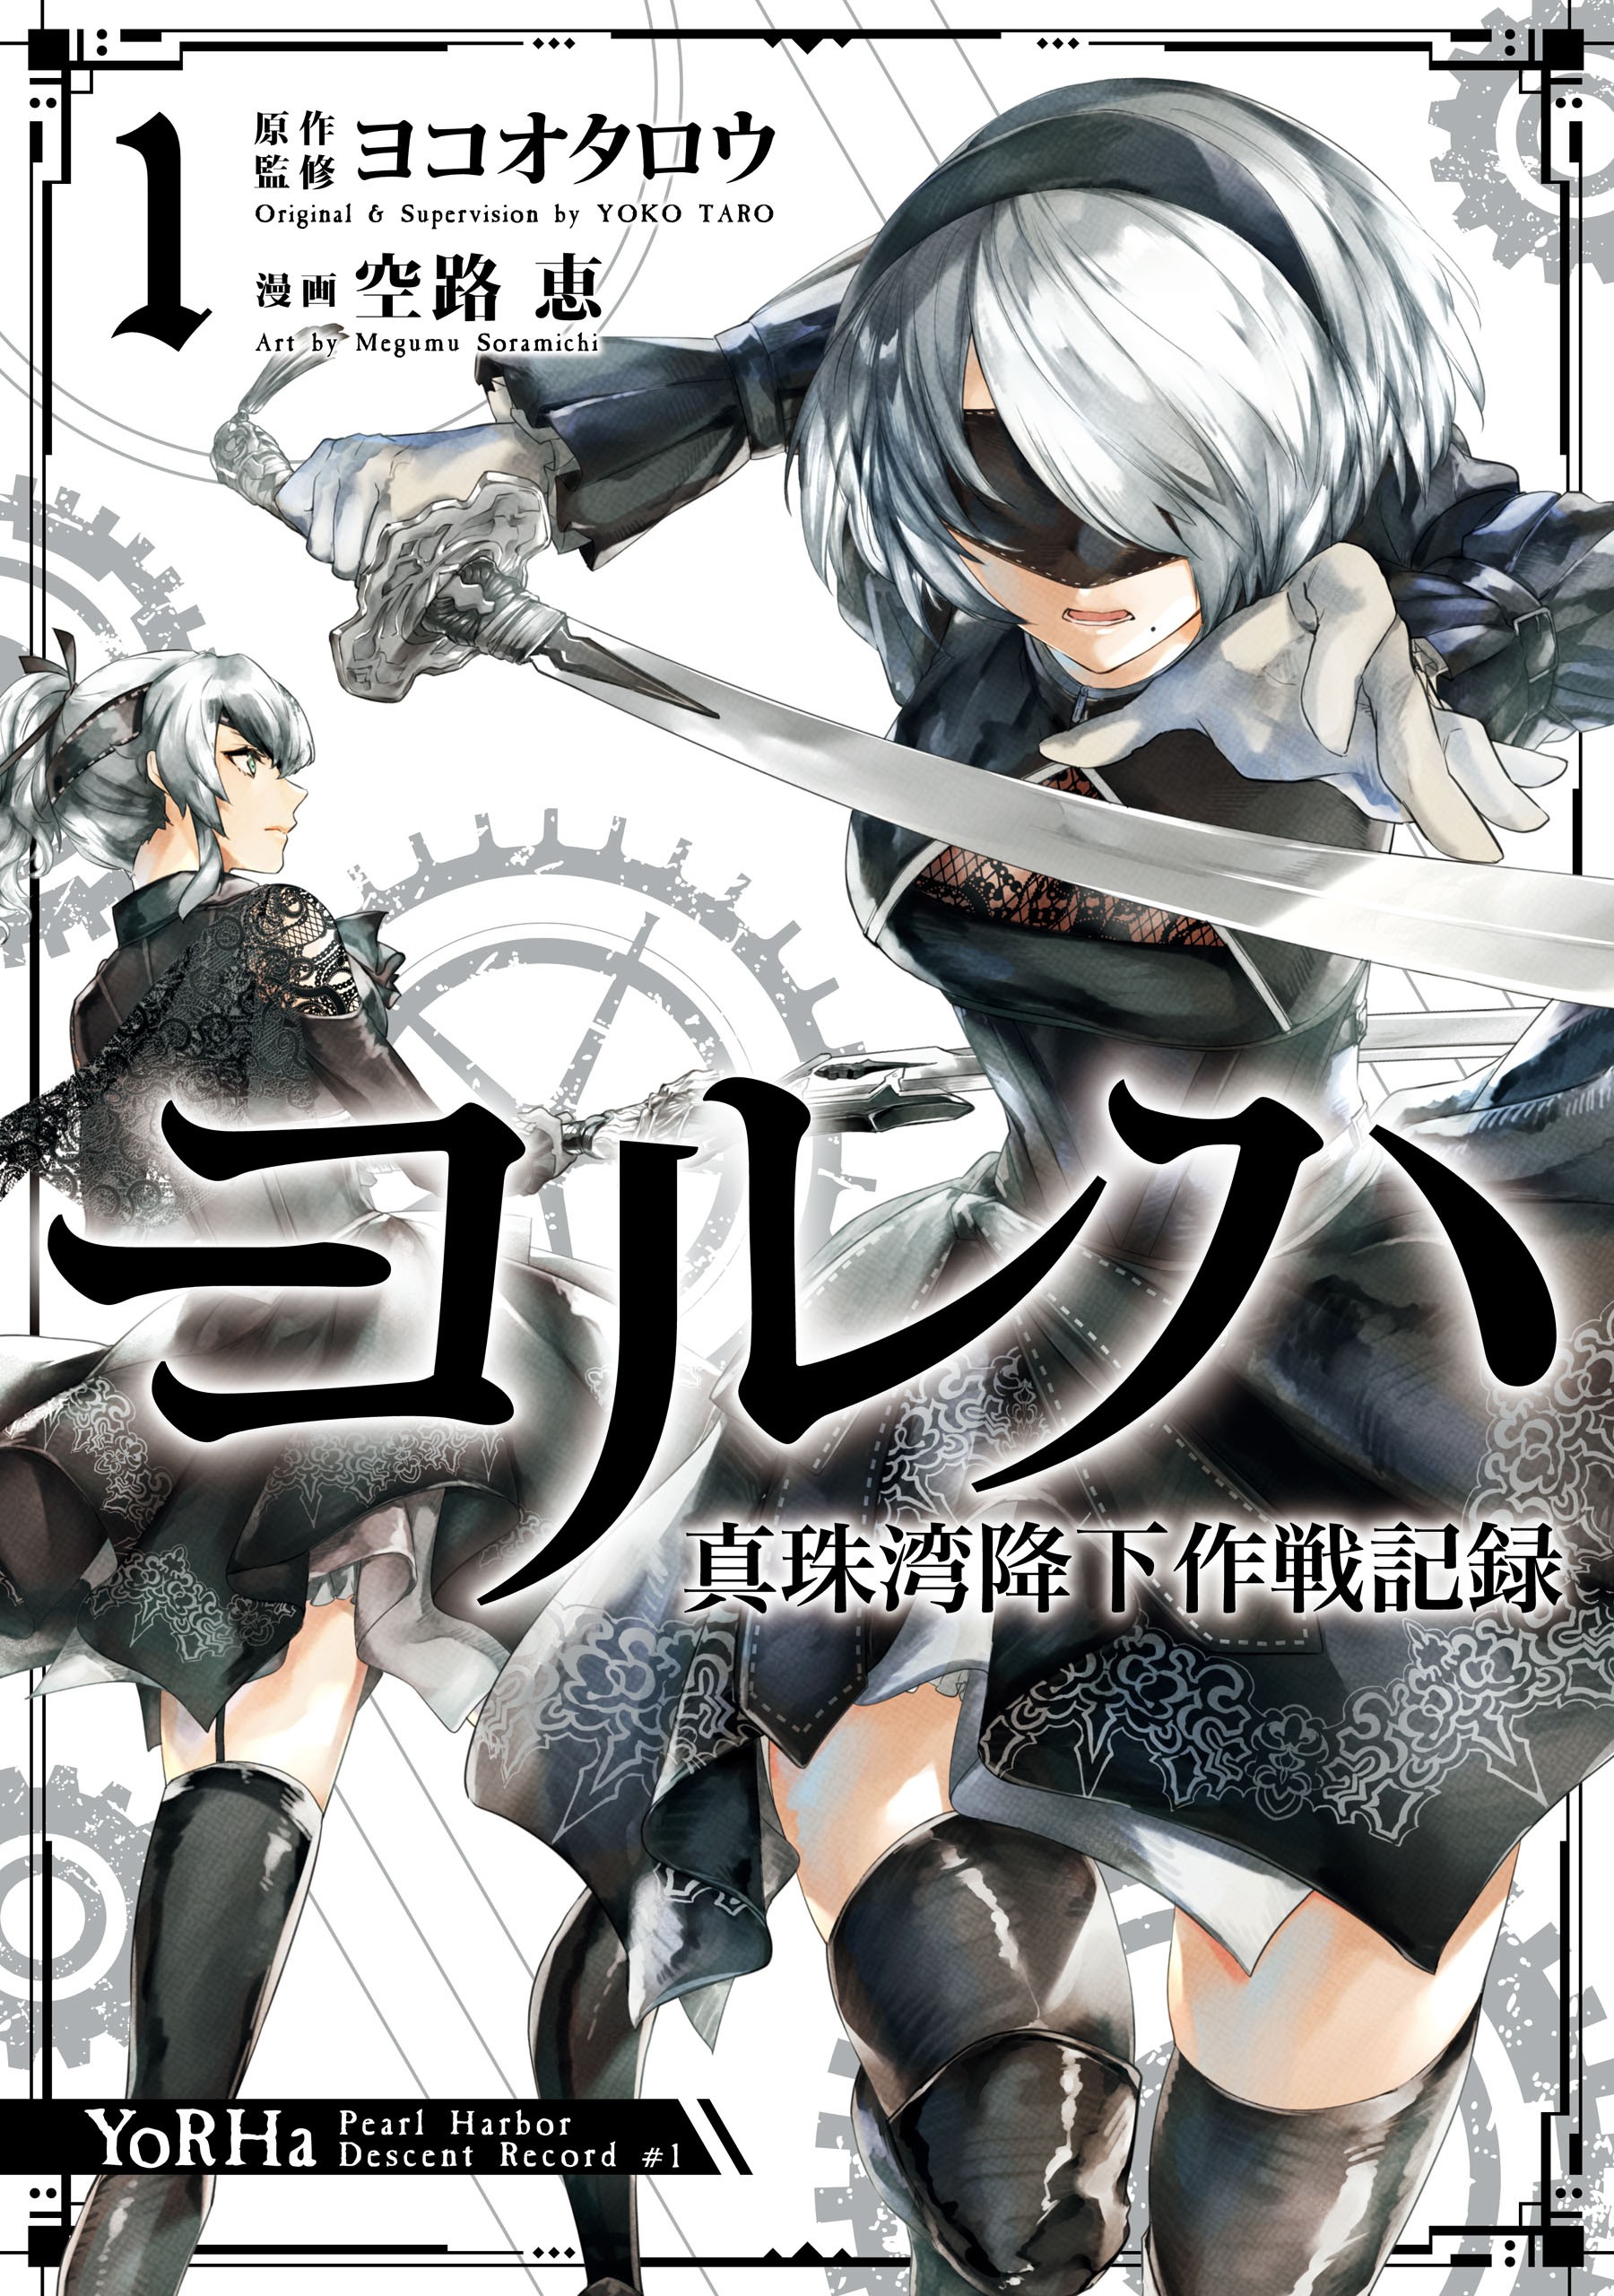 NieR:Automata Prequel Manga English Release Coming Out in December 2022